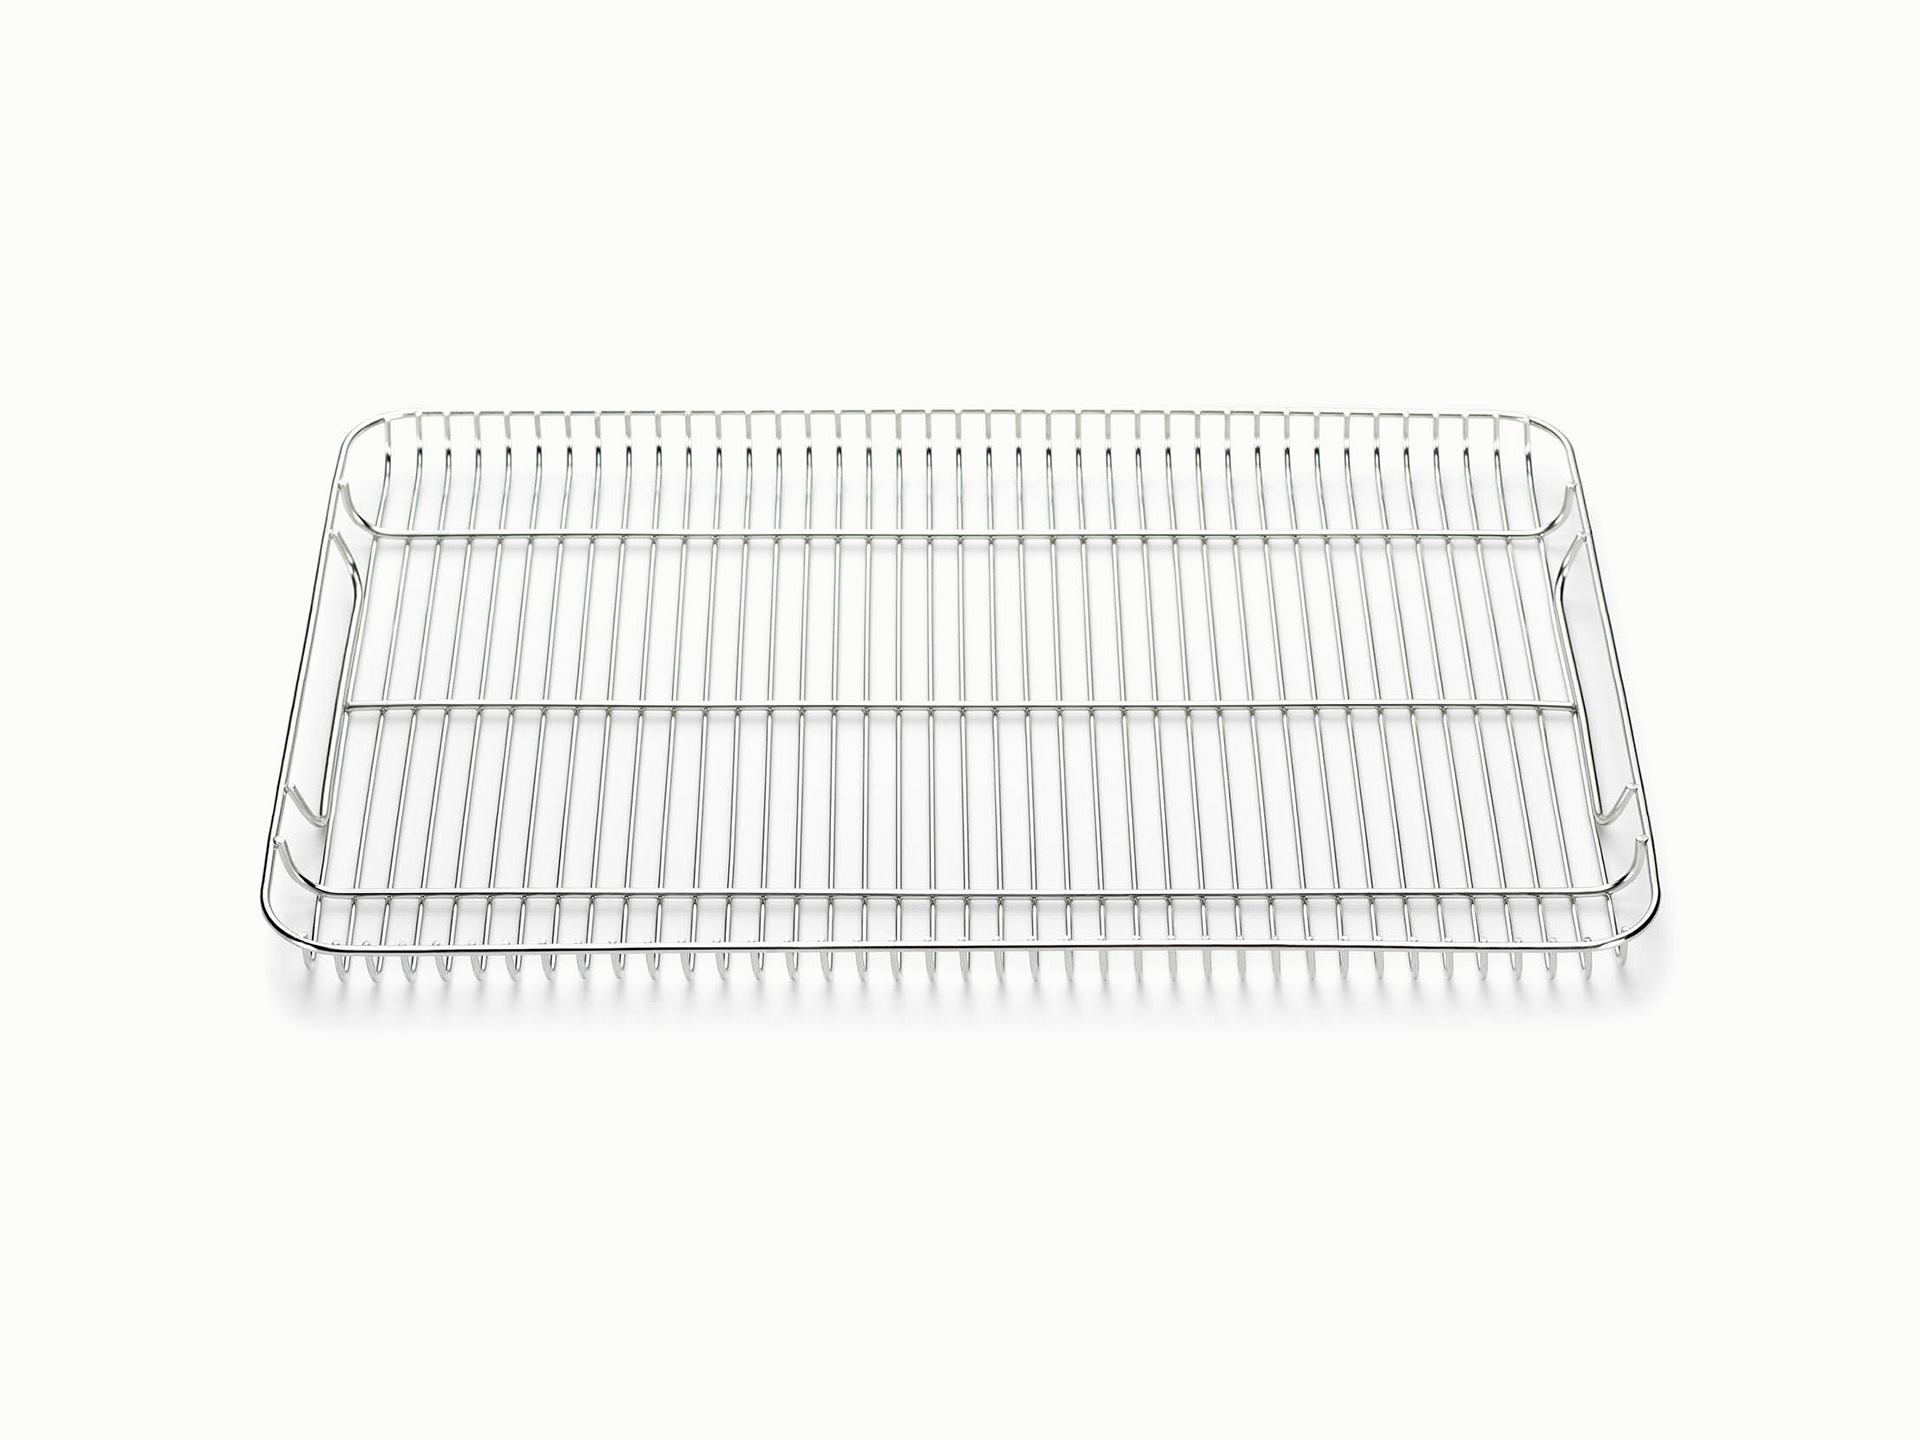 Hot Selling Stainless Steel Cooling Baking Rack Oven Safe